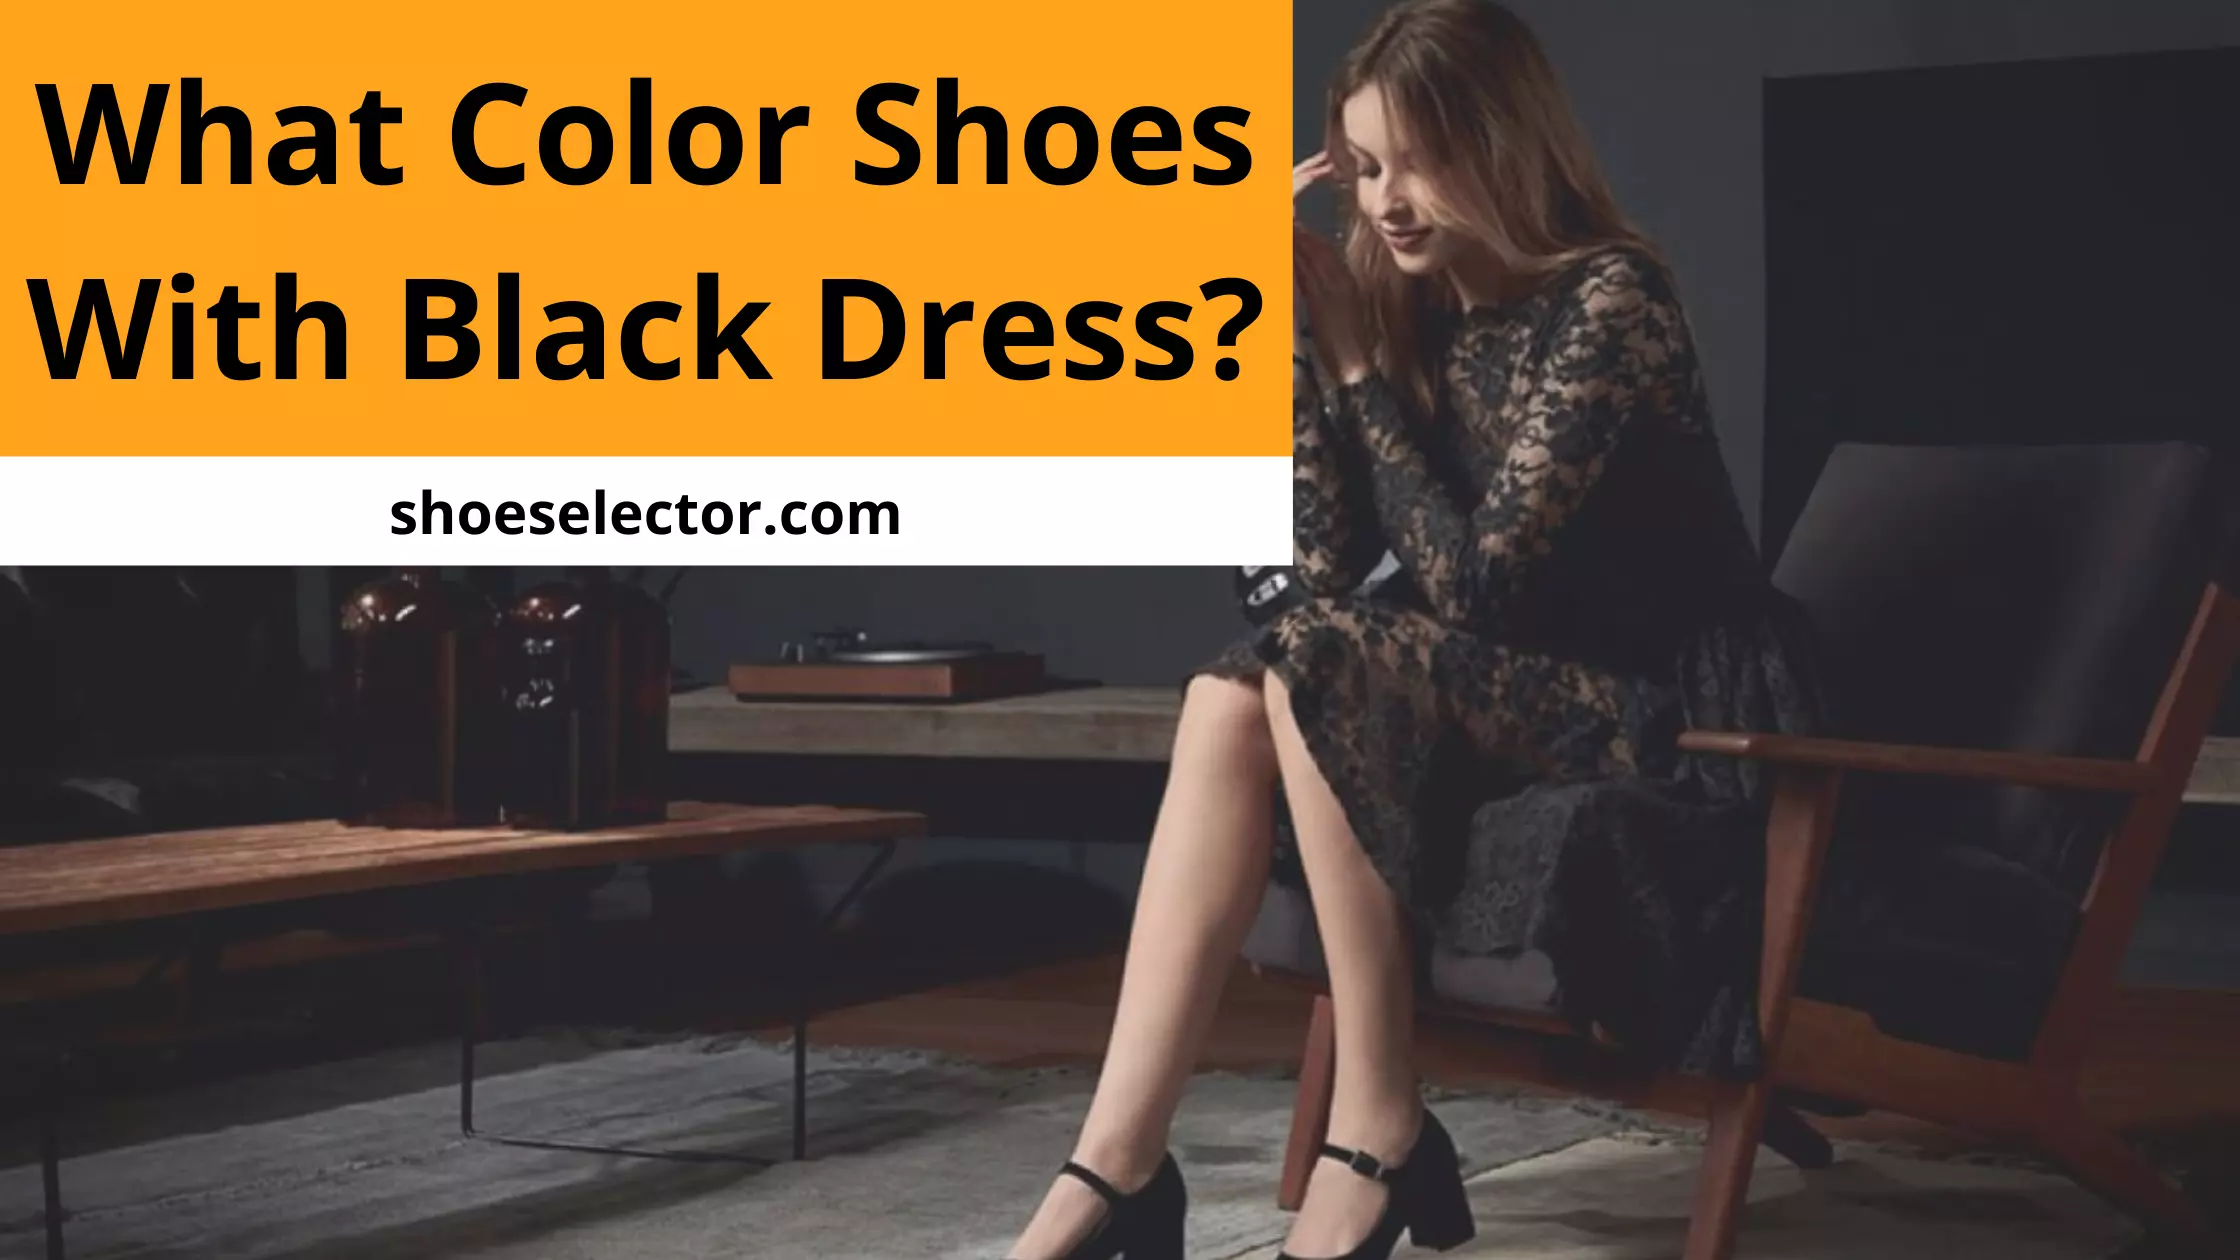 What Color Shoes With Black Dress? - Complete Guide